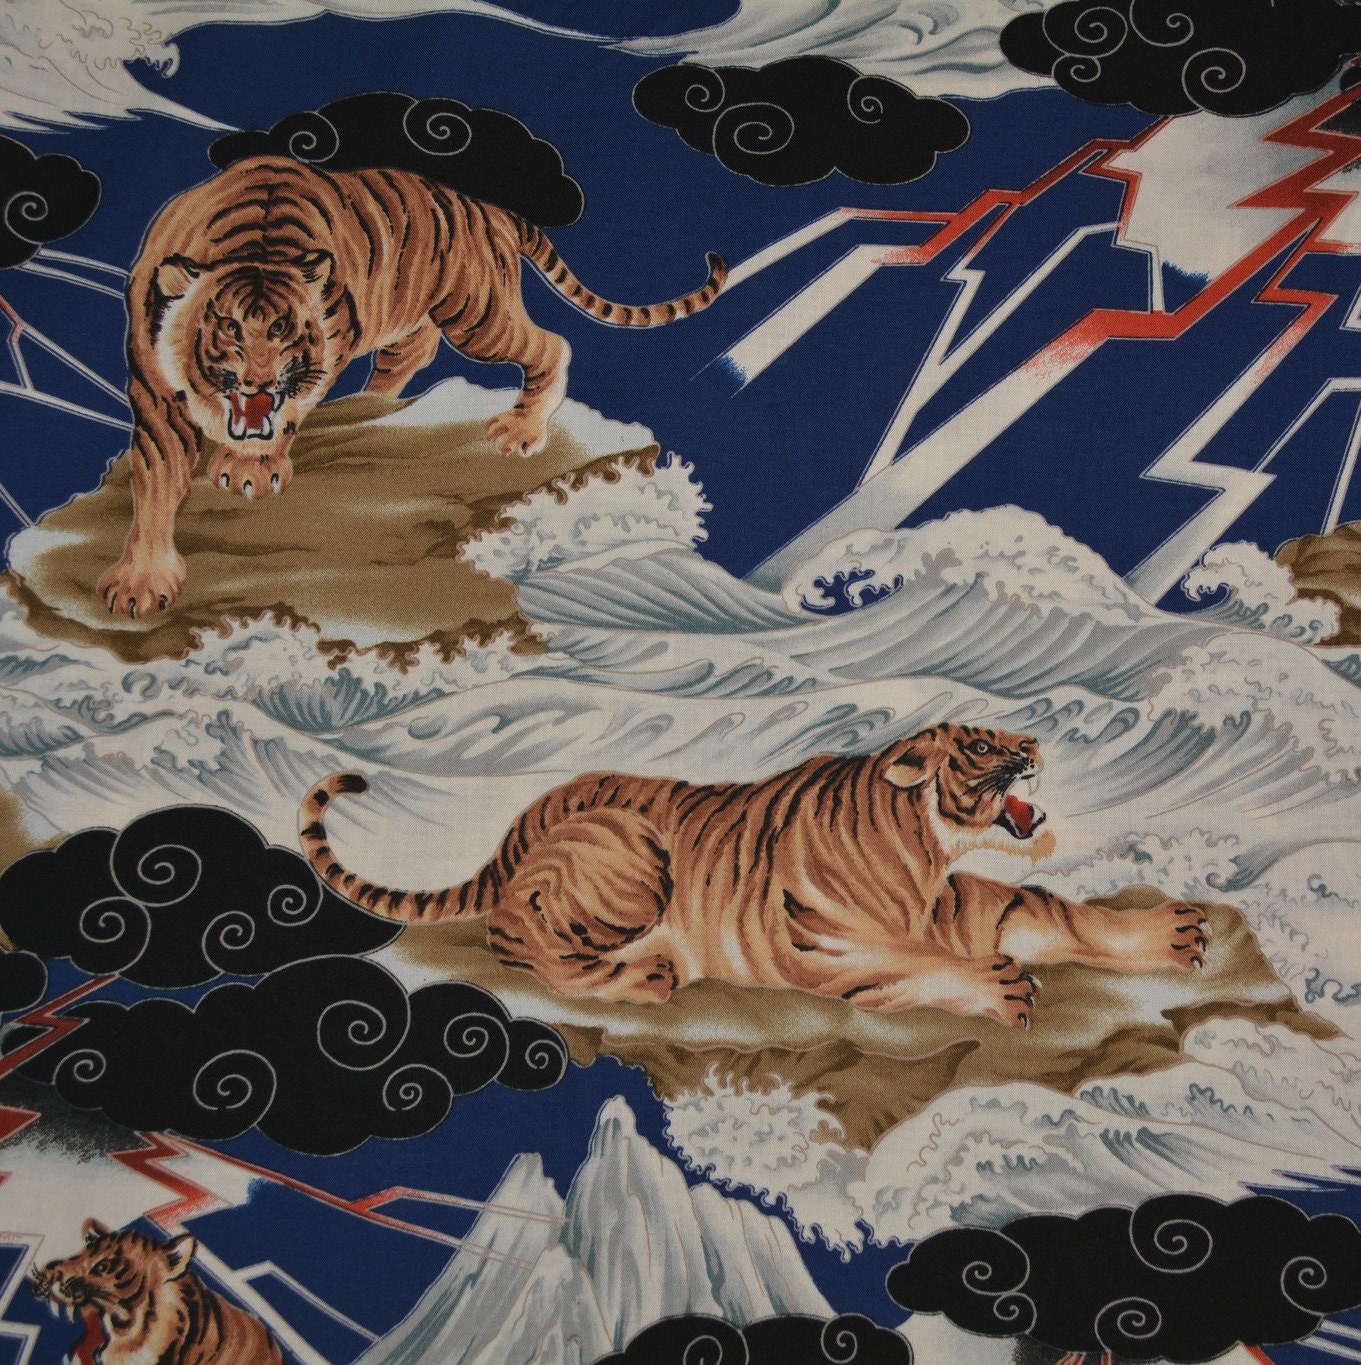 Tigers Fabric Japanese Chinese Oriental Cotton Black With 